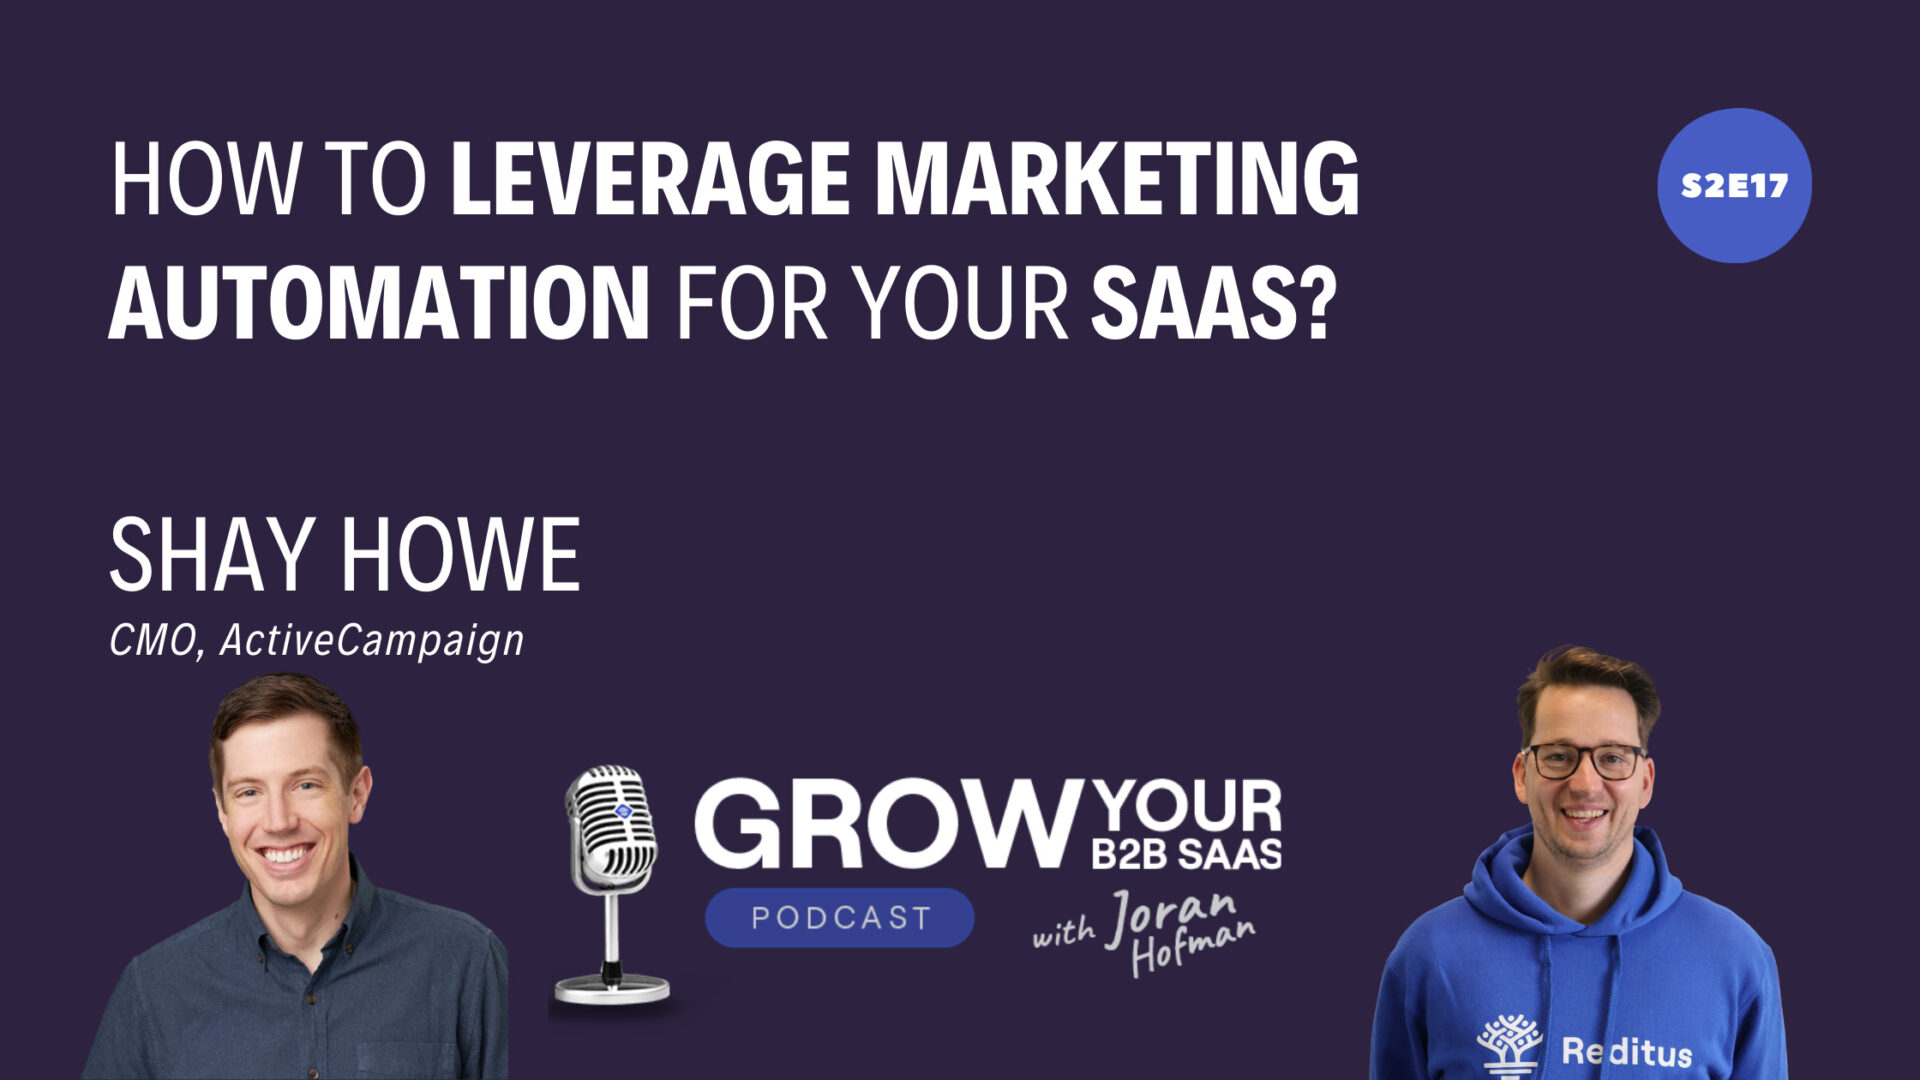 https://www.getreditus.com/podcast/s2e17-how-to-leverage-marketing-automation-for-your-saas-with-shay-howe/